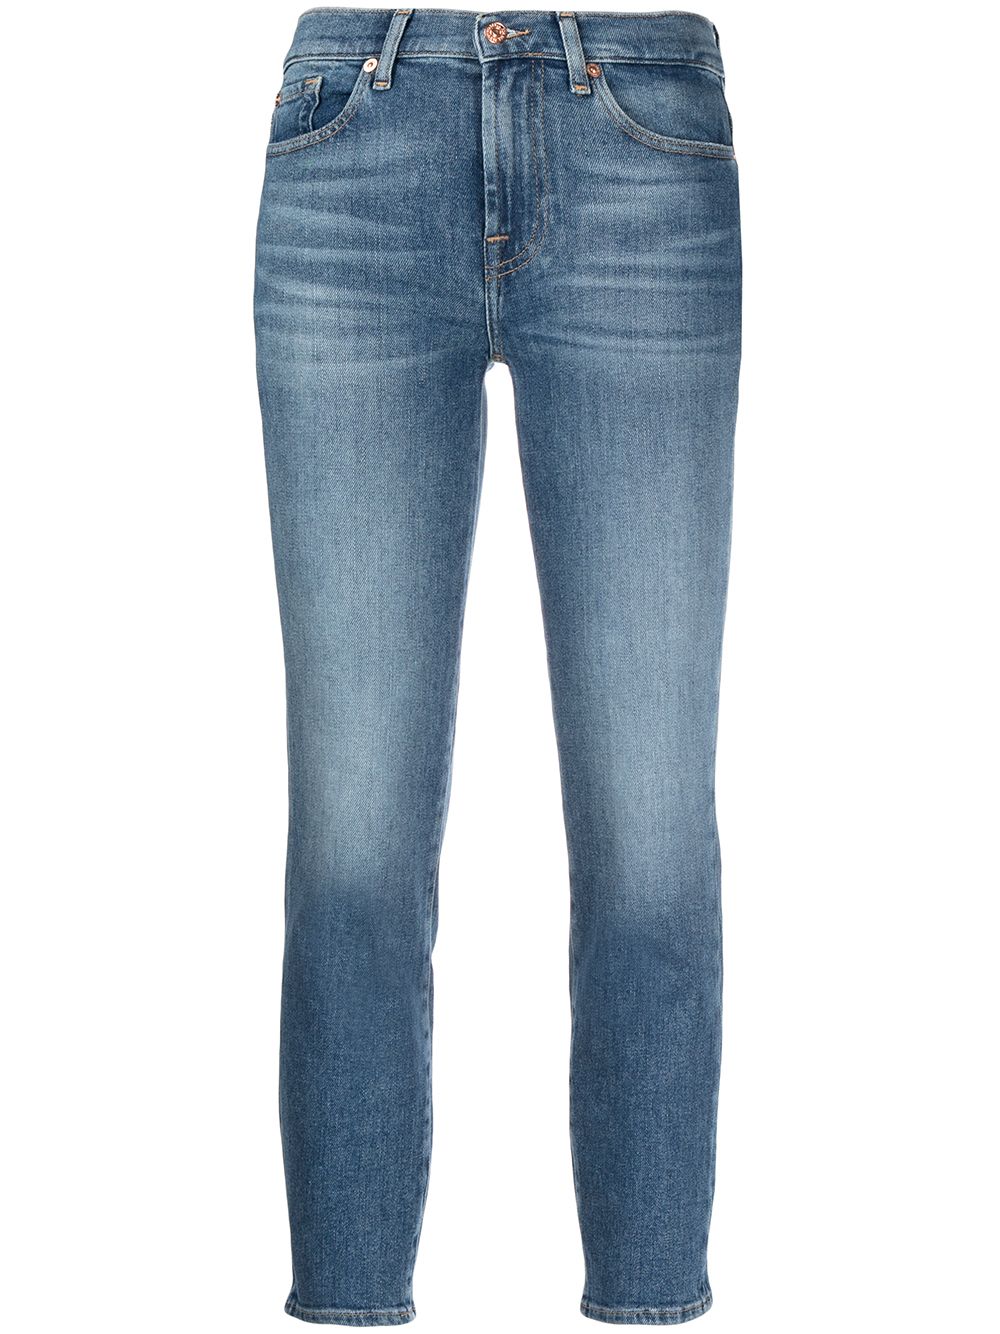 7 For All Mankind mid-rise skinny cropped jeans - Blue von 7 For All Mankind